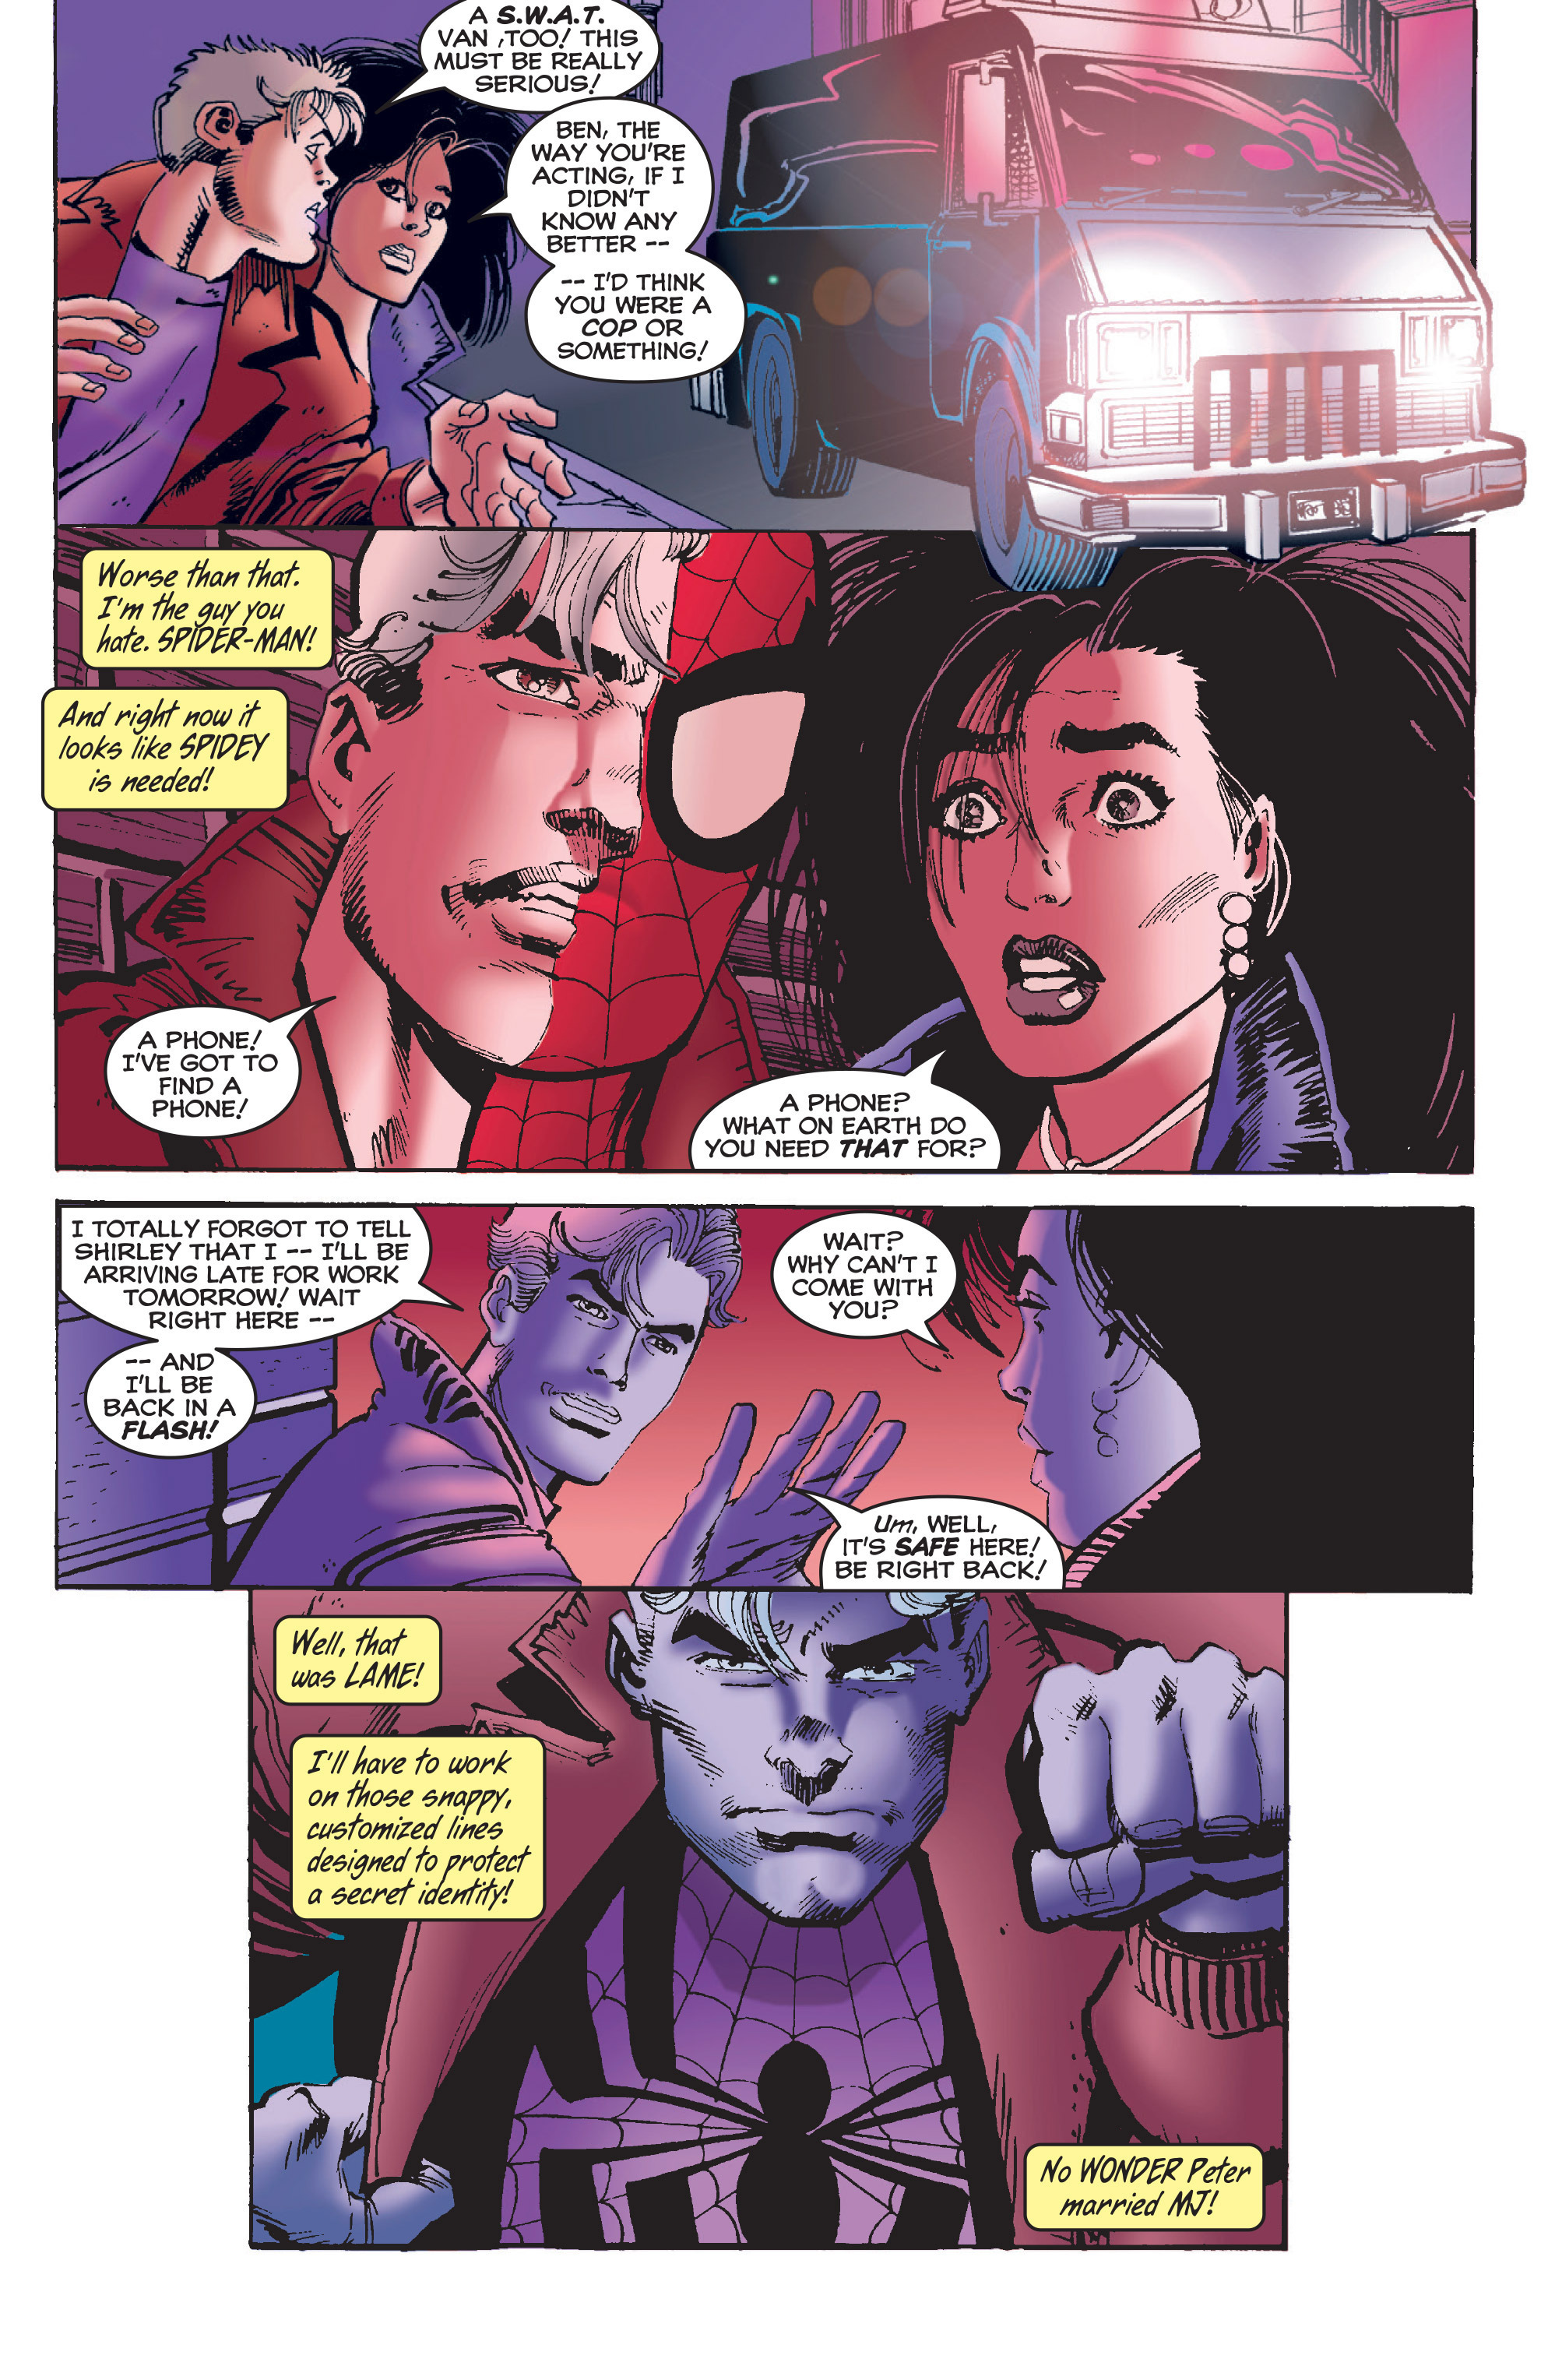 Read online The Amazing Spider-Man: The Complete Ben Reilly Epic comic -  Issue # TPB 4 - 13